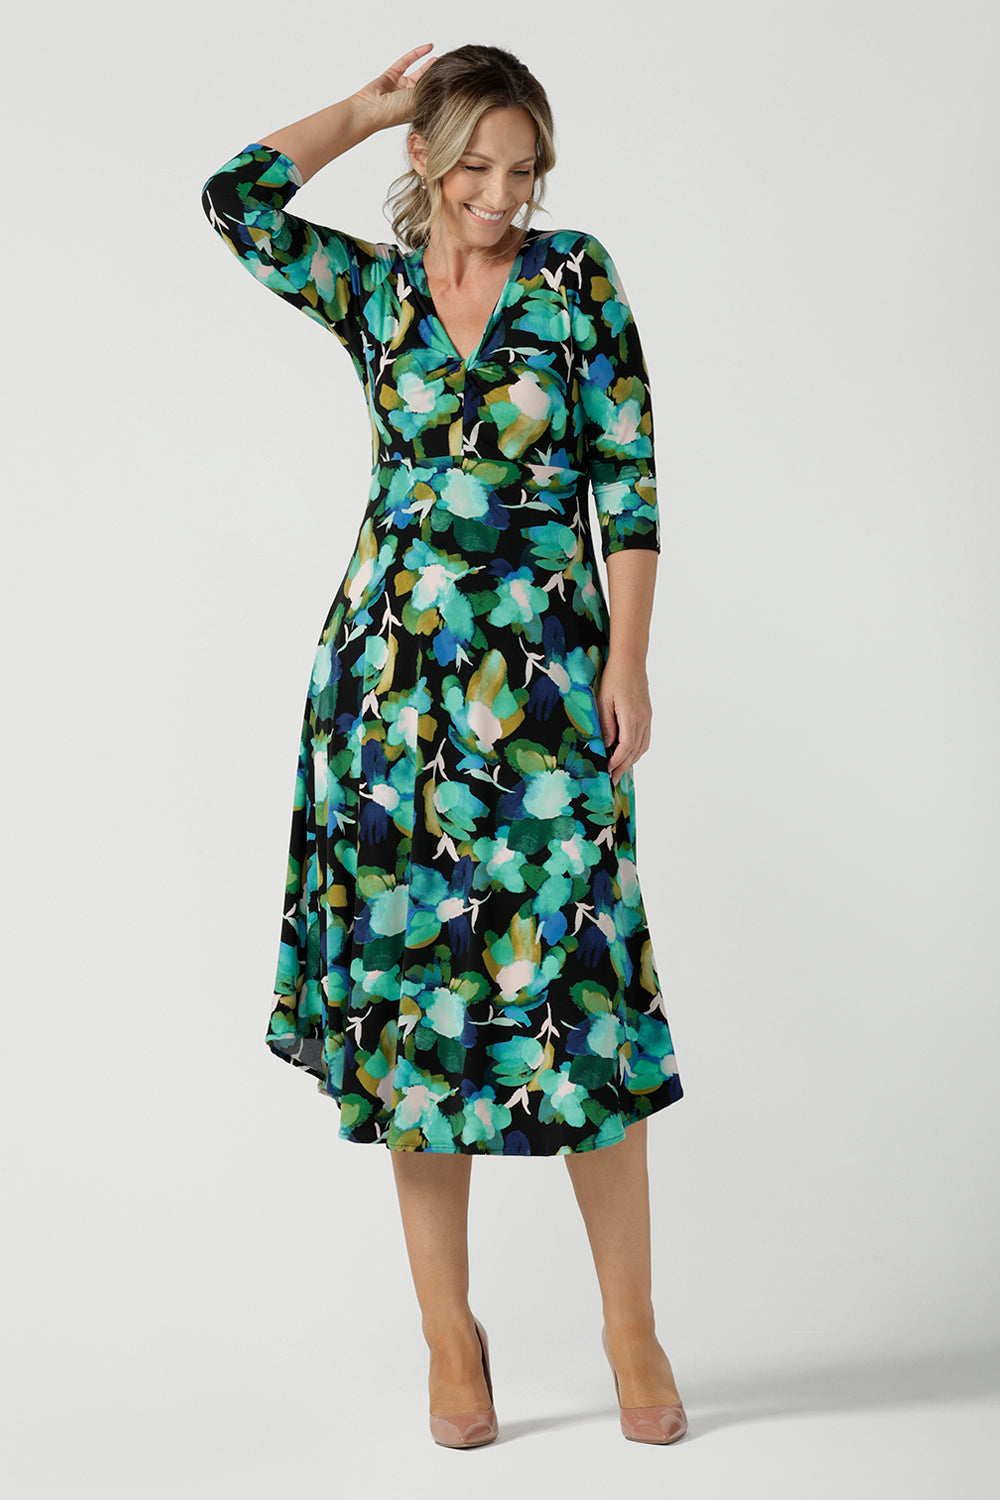 A size 8 woman wears the Kyra dress in Canopy. A twist front dress with a 3/4 sleeve on a watercolour print. Made in Australia for women size 8 - 24.